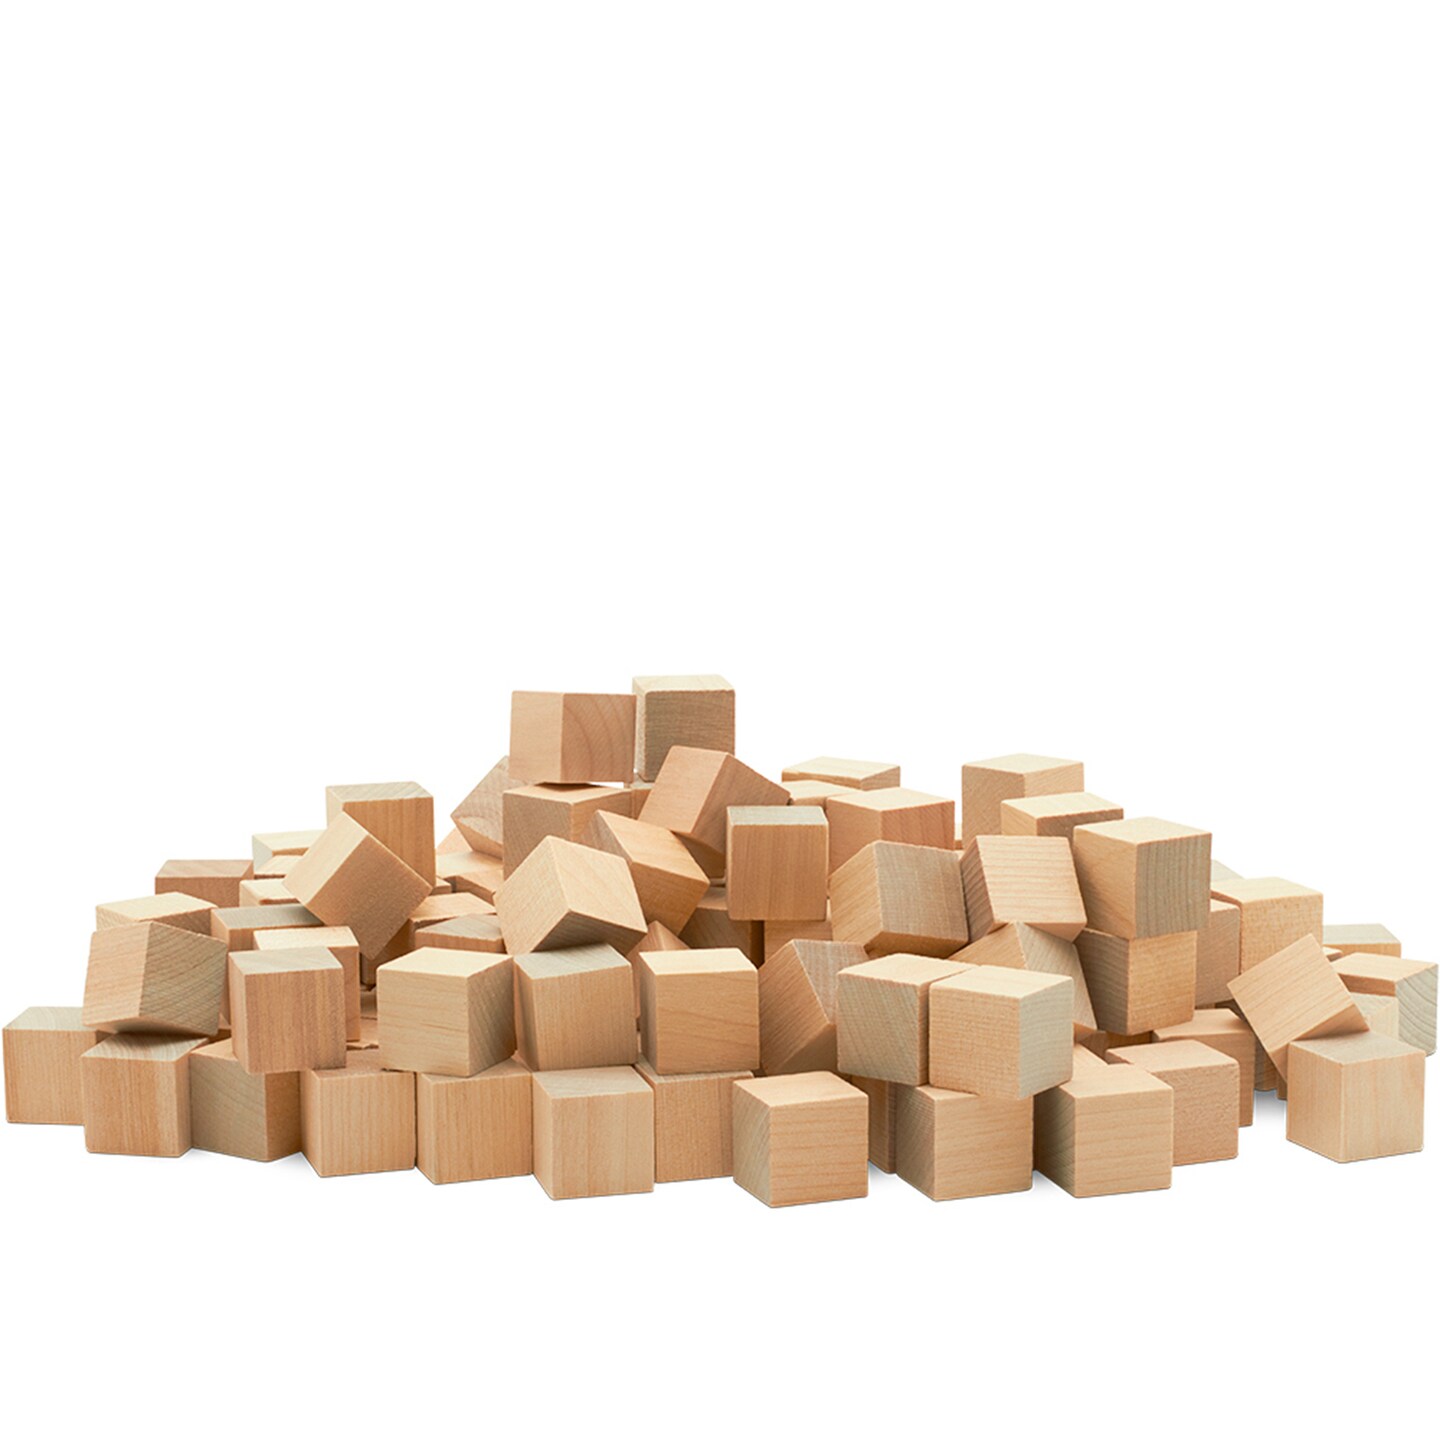 Wood Craft Cubes, Multiple Sizes Available, Small Blocks, Crafts & Dcor, Woodpeckers